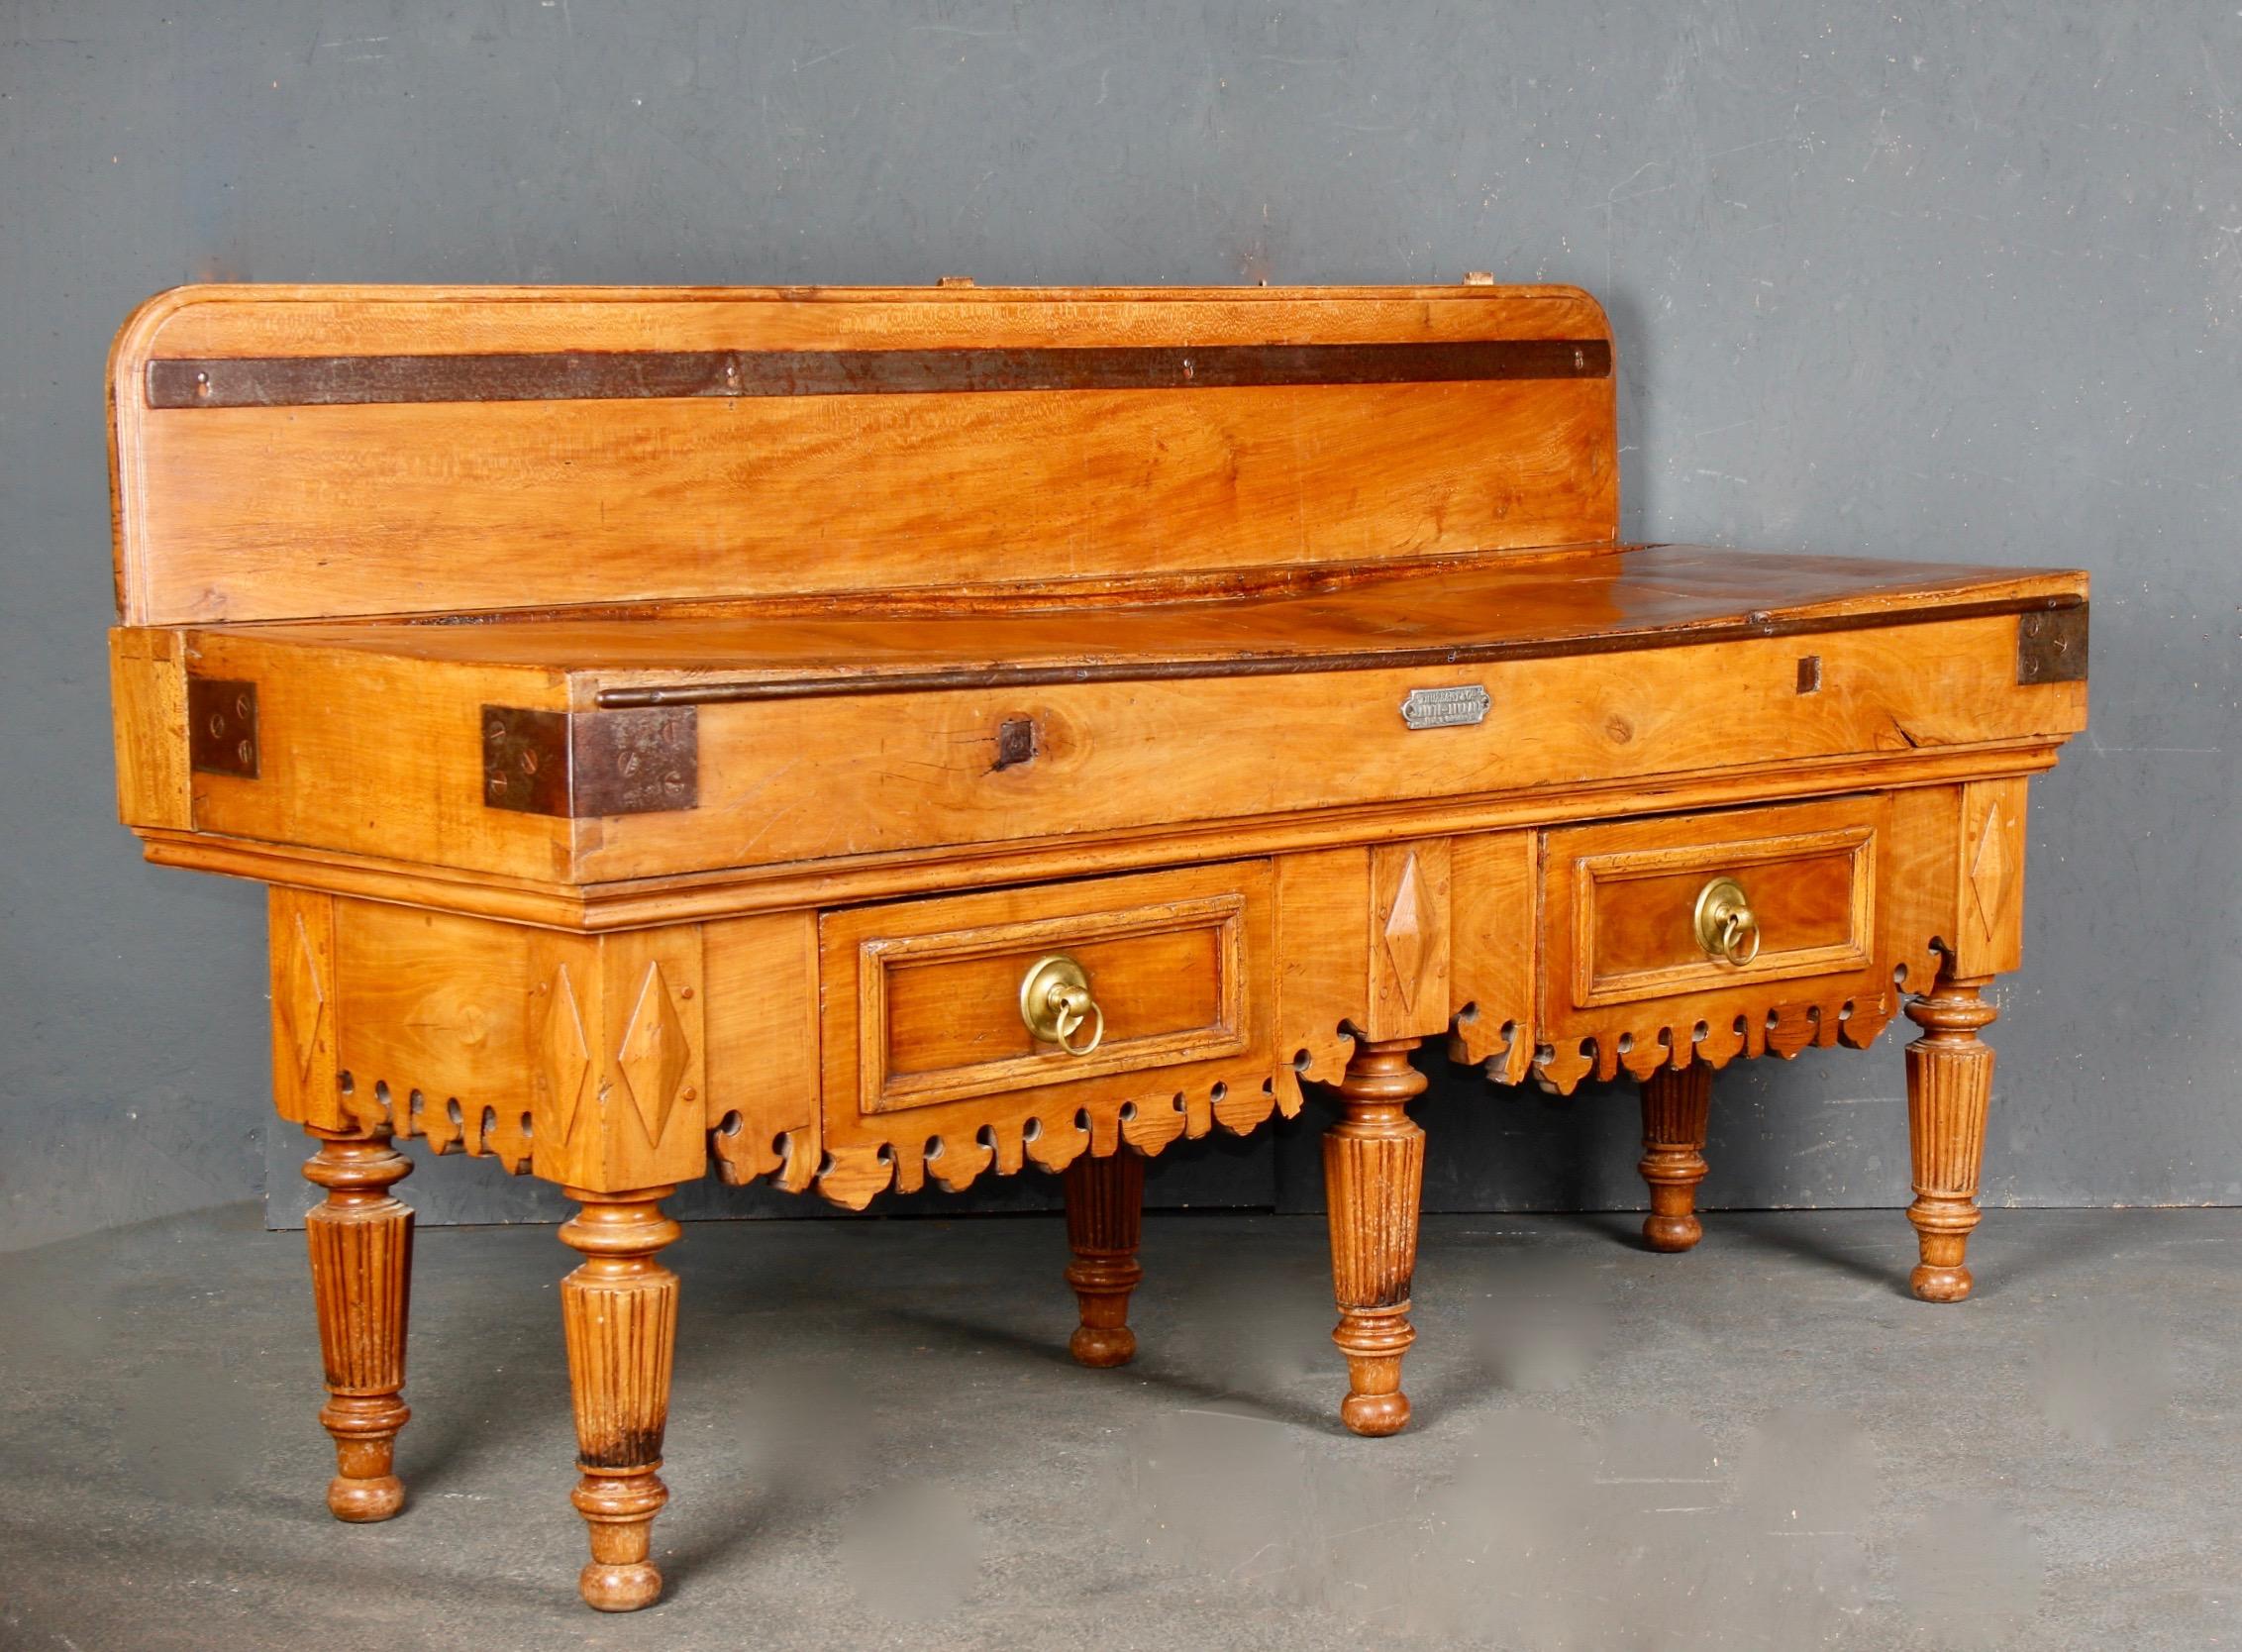 Long double Butcher Block Table, circa 1890. Large piece has three drawers and one knife slot. A fabulous, authentic 19th century French billot de boucher or butcher block, circa 1890s, handcrafted of mixed woods including maple by Trussant & Cie ,